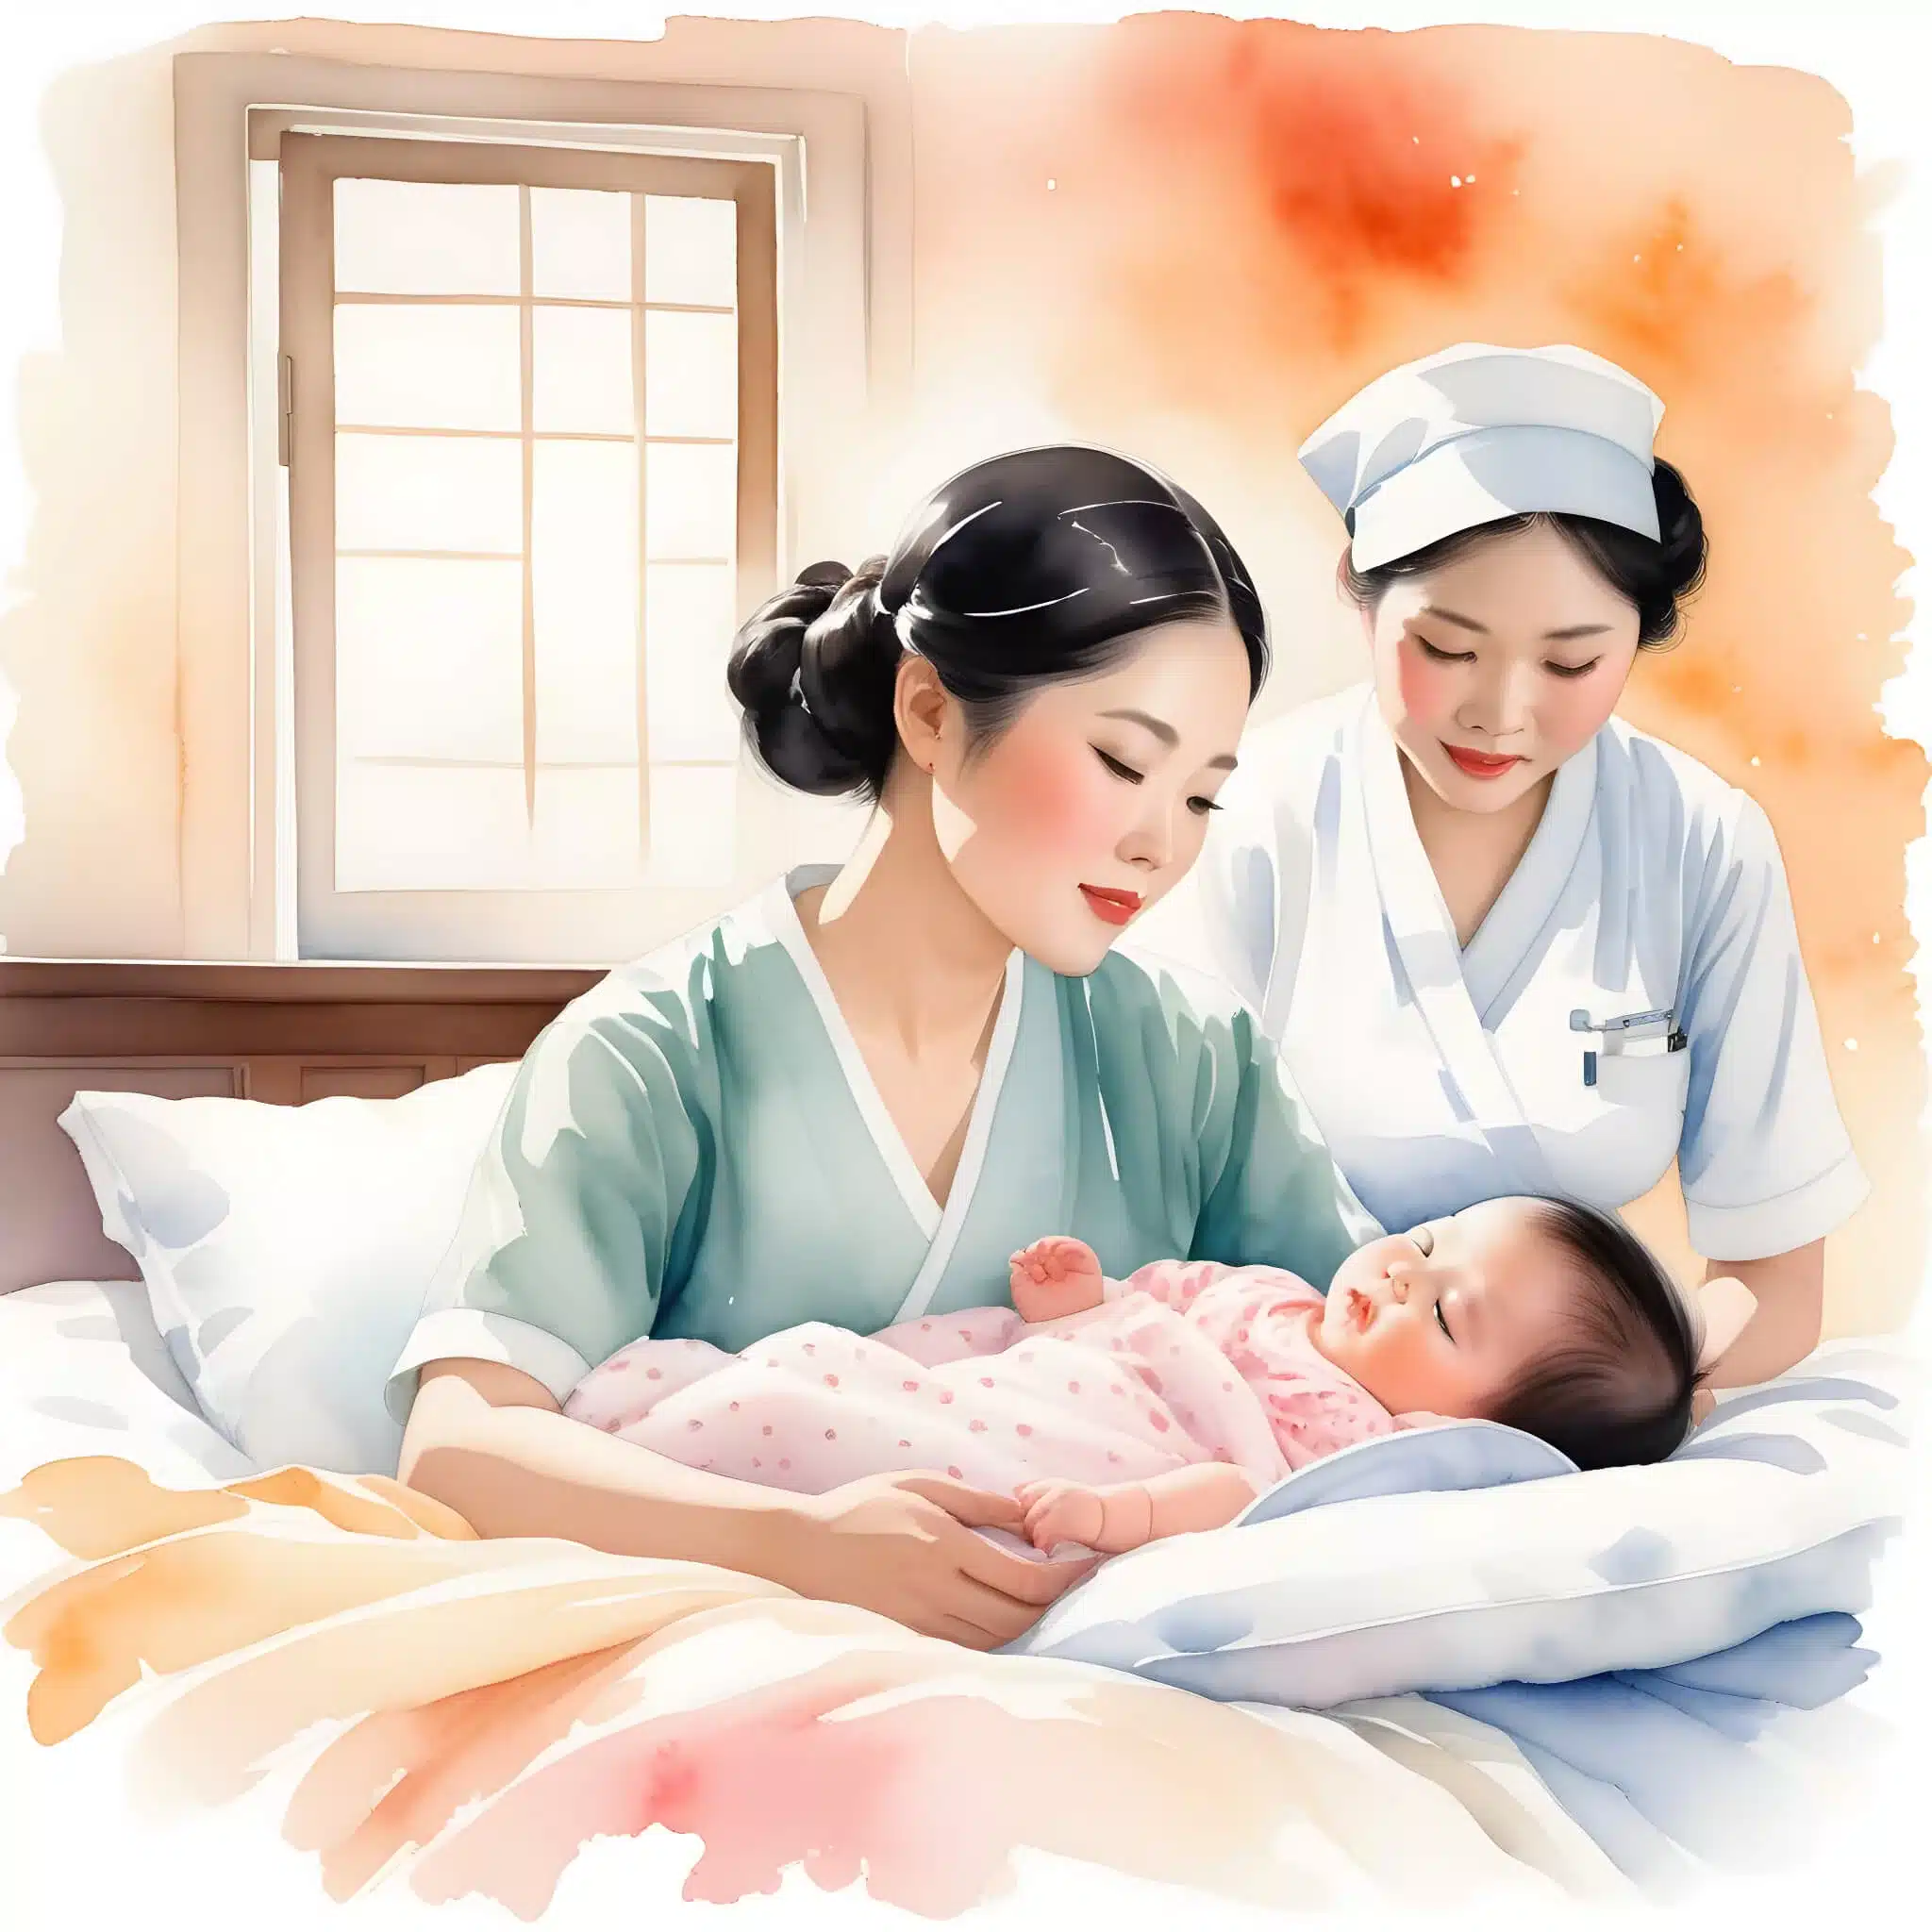 Hiring a Night Nurse for Baby: Cost, Duties, Pros & Cons